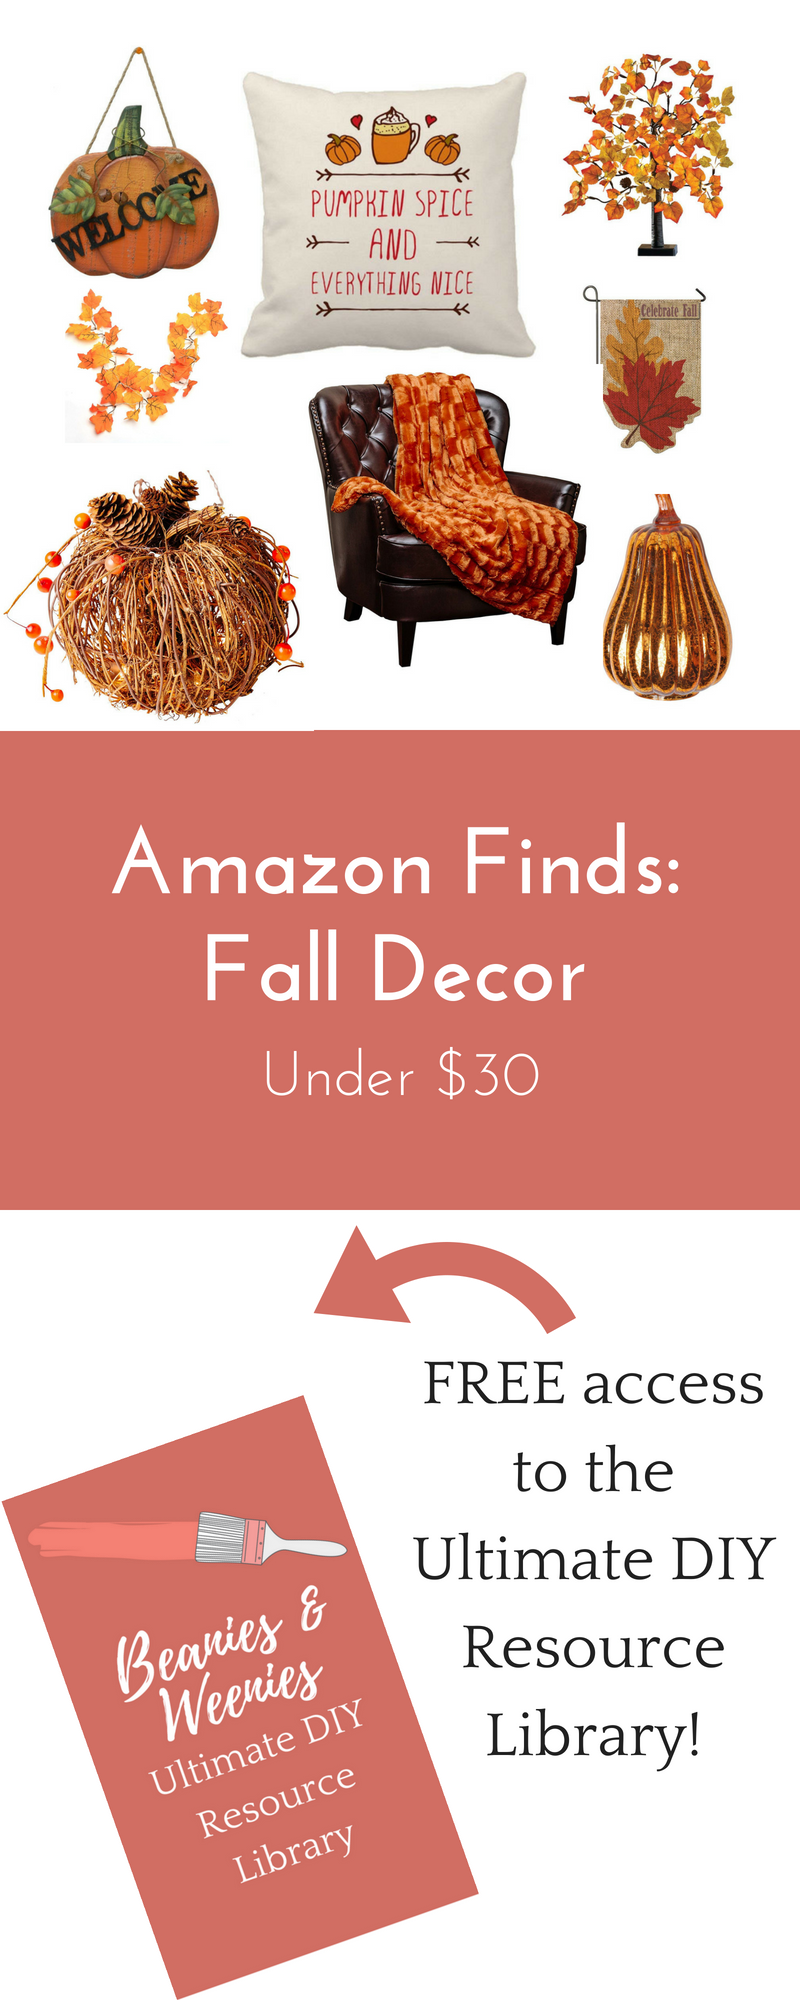 Amazon Finds: Fall Decor Under $30